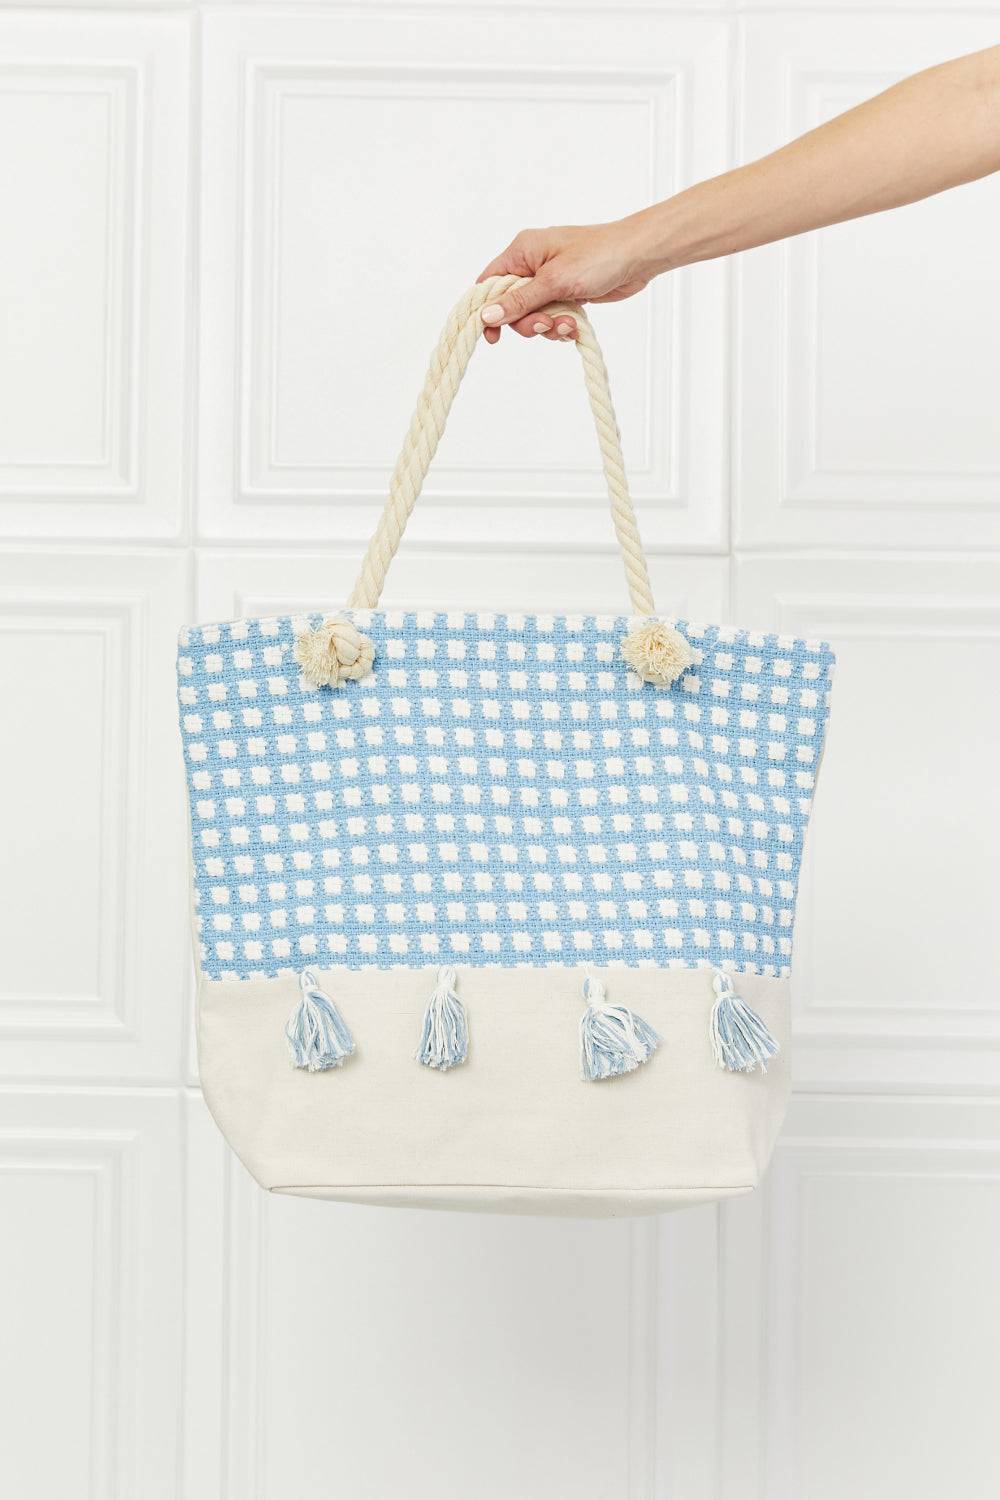 a hand holding a blue and white bag